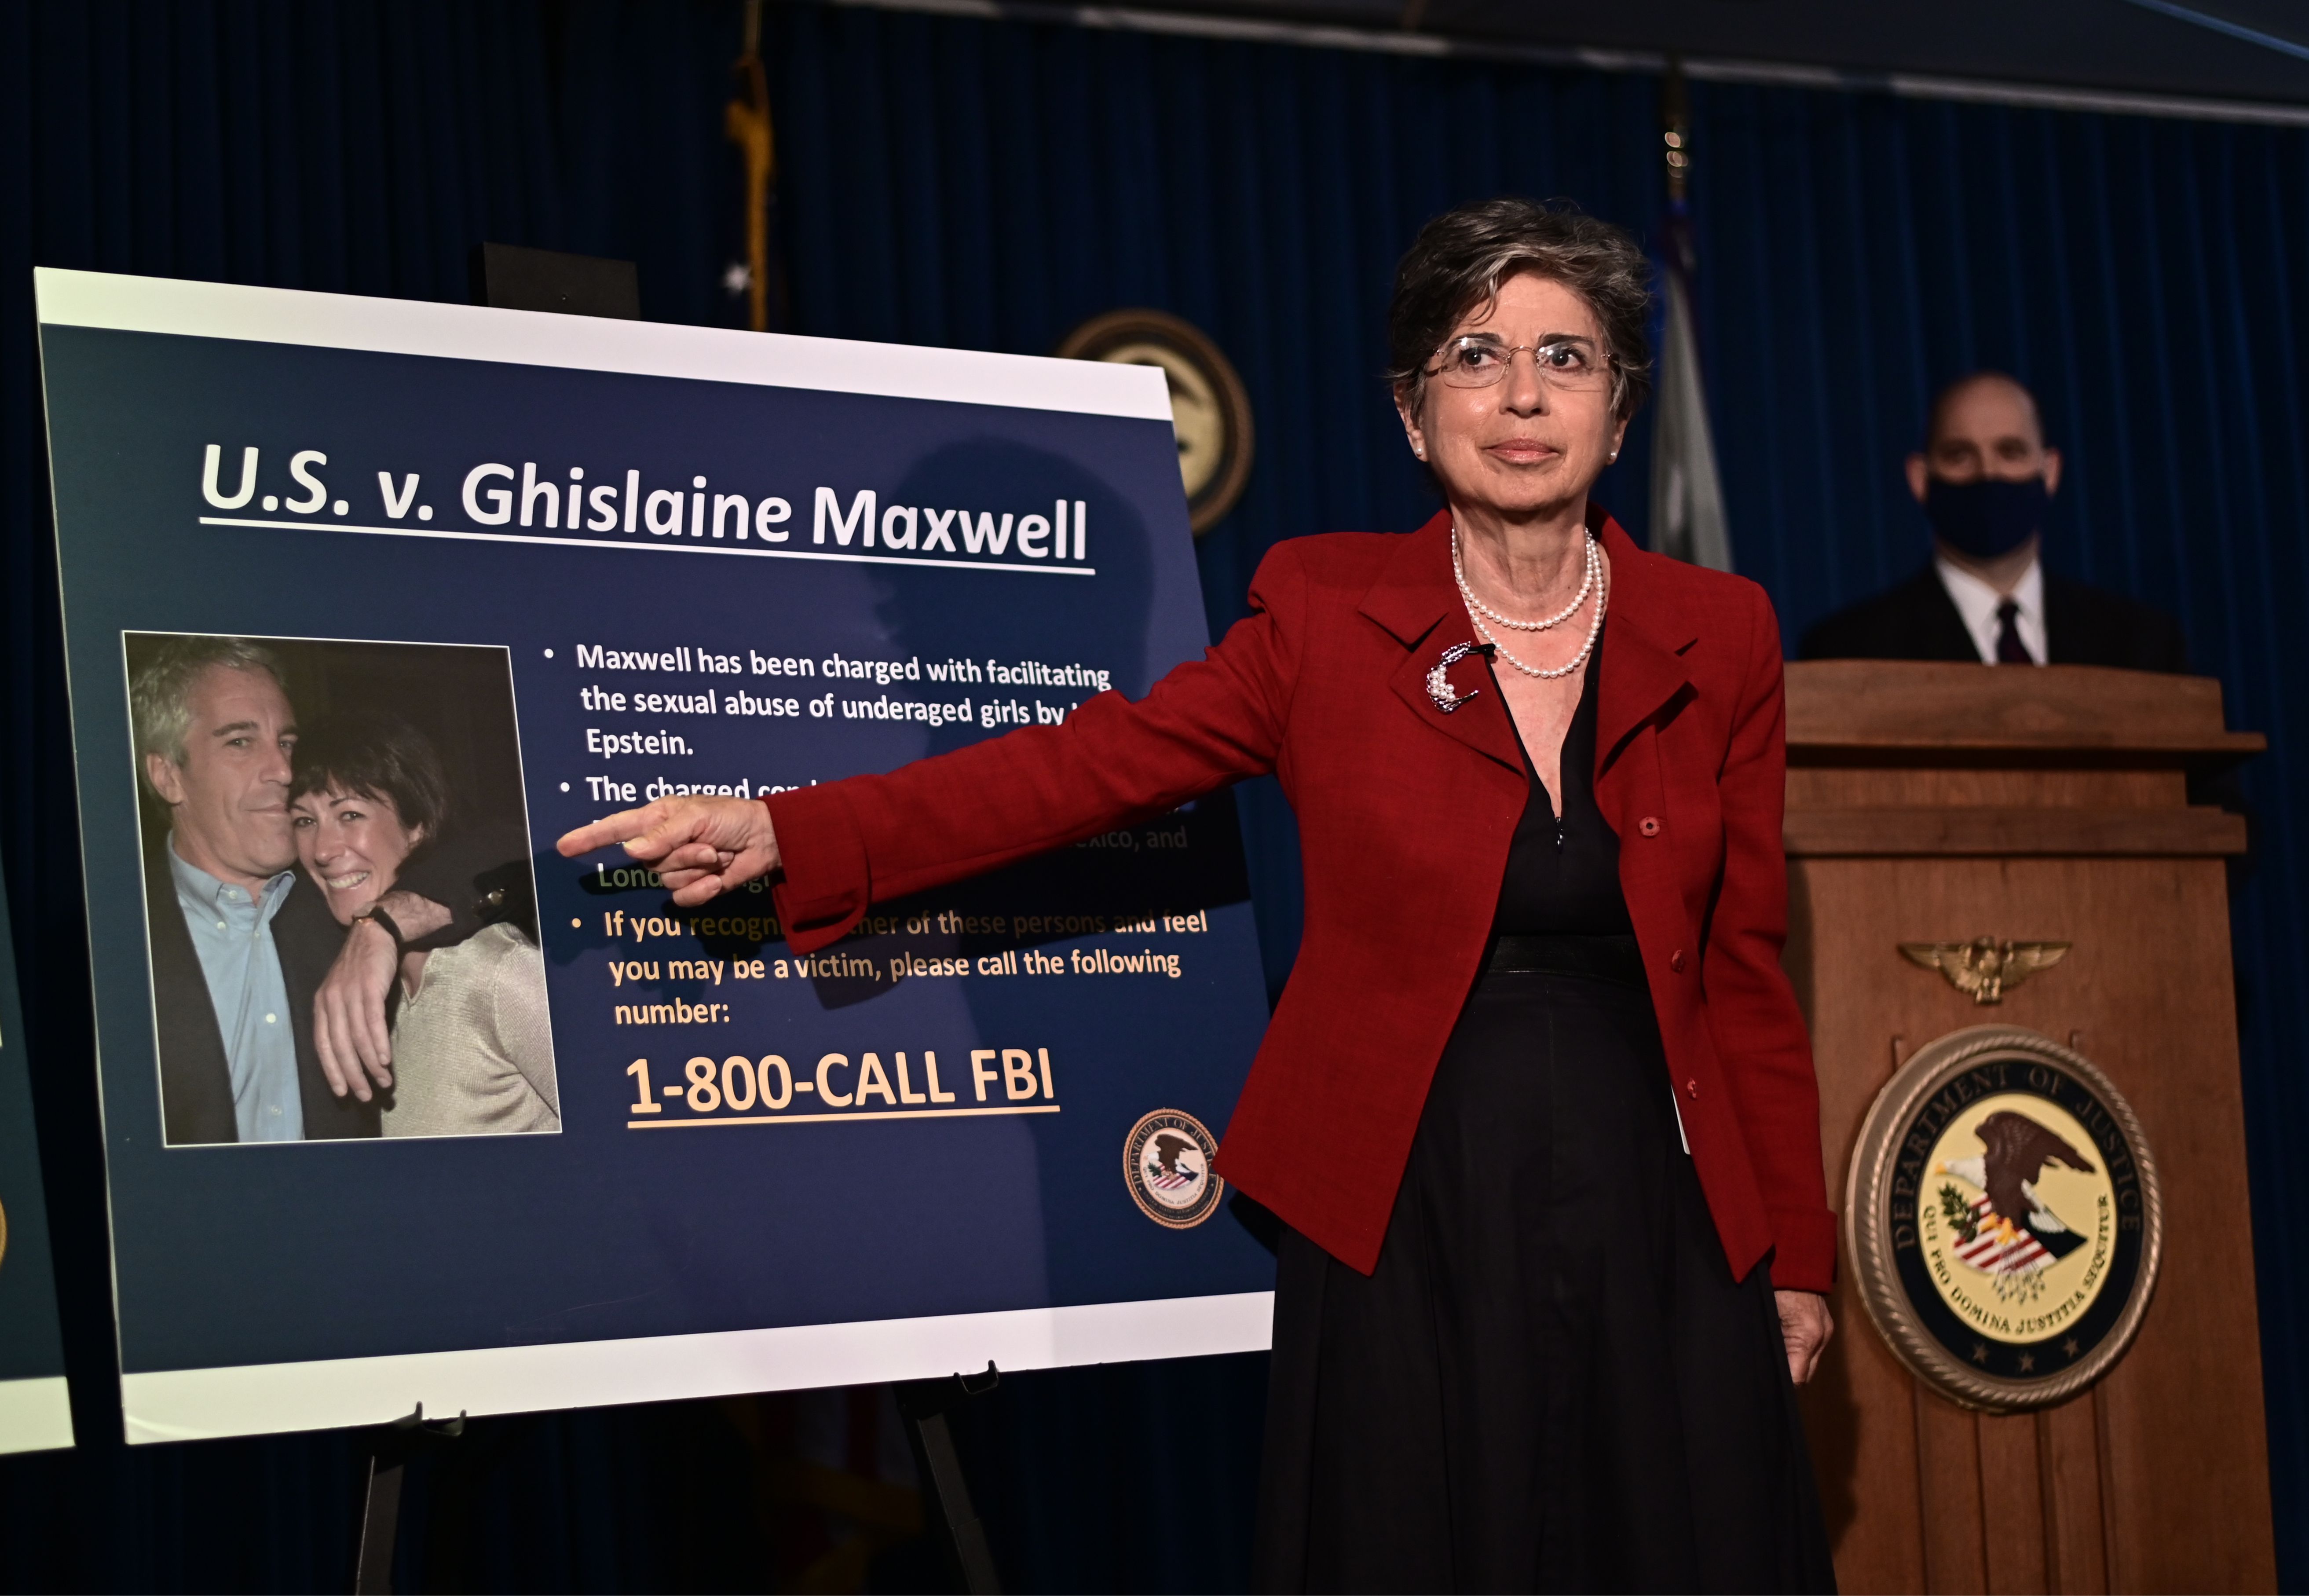 Acting US Attorney for the Southern District of New York, Audrey Strauss, announces charges against Ghislaine Maxwell during a July 2, 2020, press conference in New York City. (Photo by JOHANNES EISELE/AFP via Getty Images)